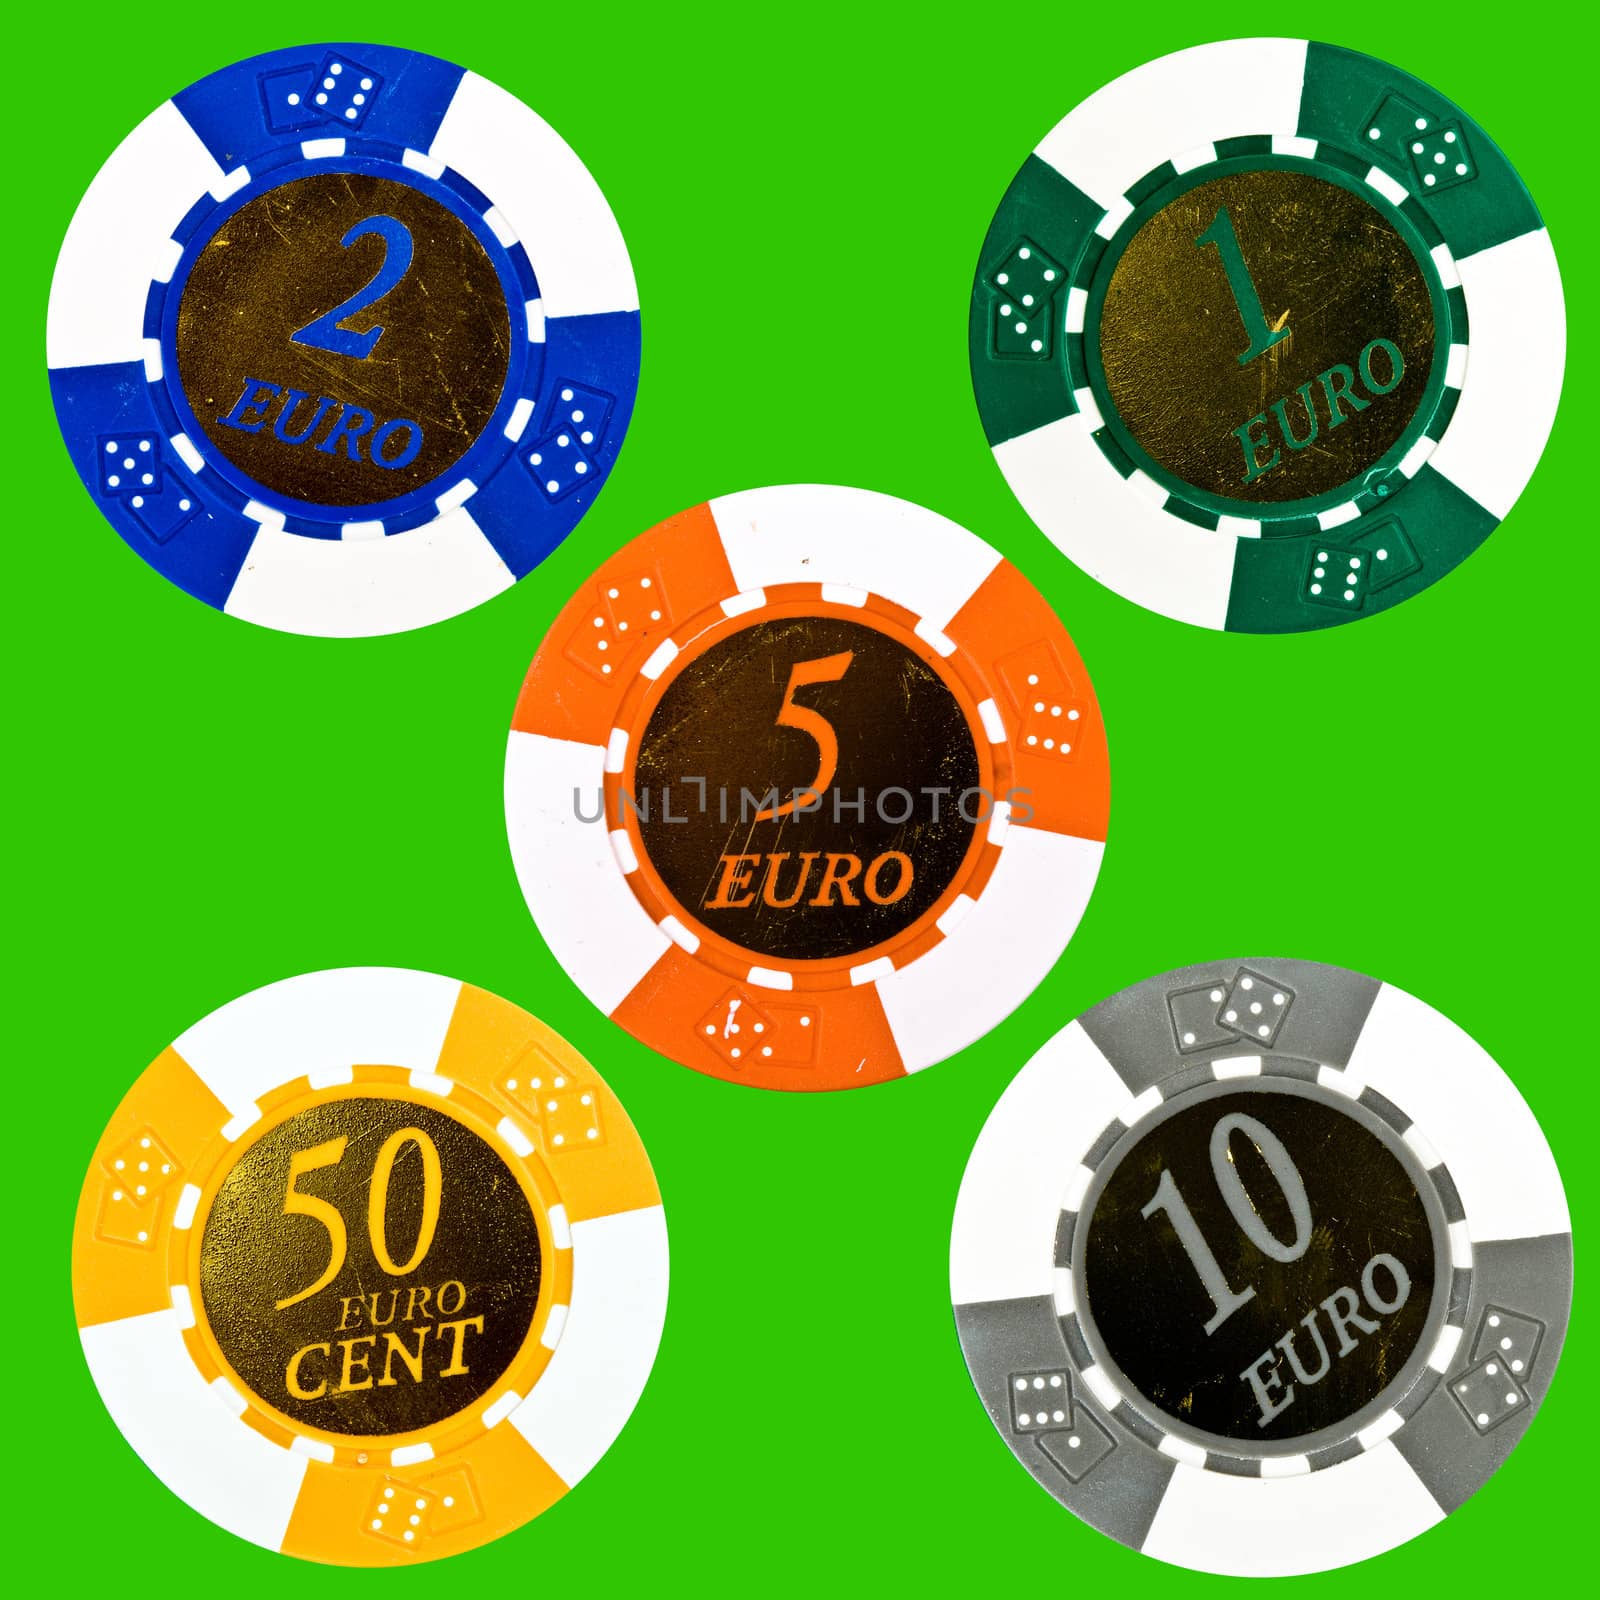 An image of five poker chips on green background